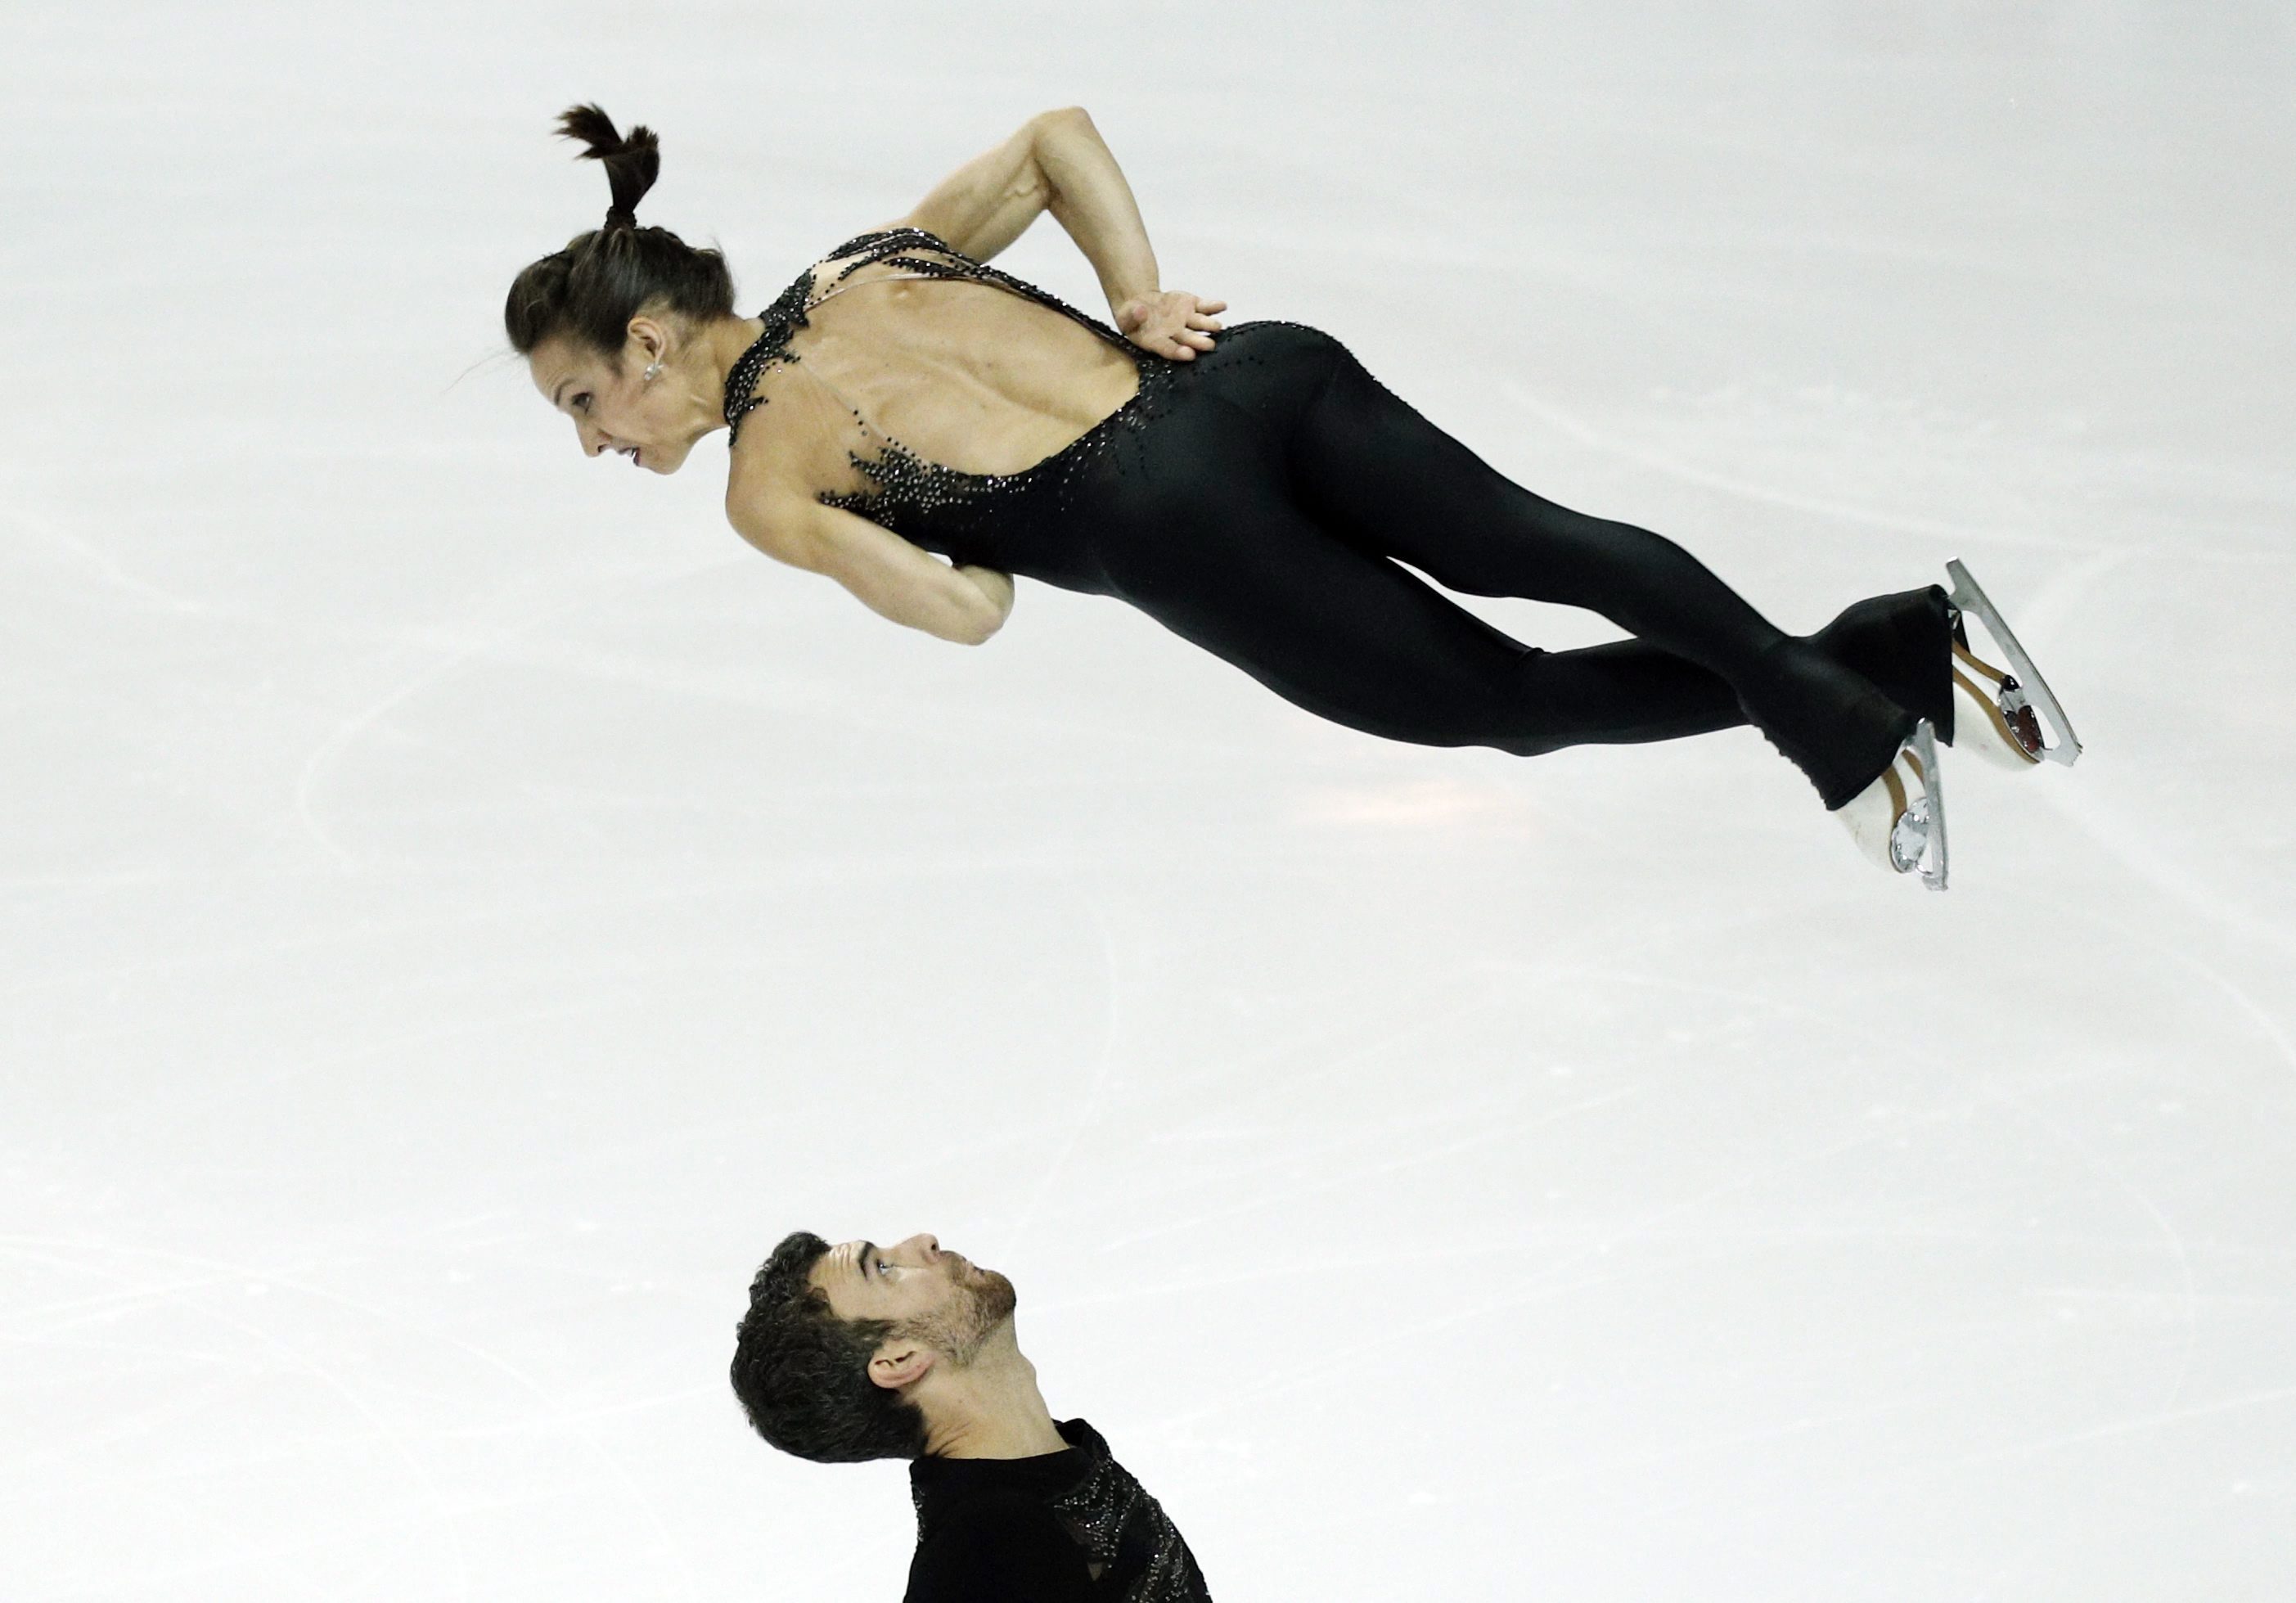 Meagan Duhamel and Eric Radford of Canada competes in the Pairs Short Program during ISU Grand Prix of Figure Skating Final in Marseille, southern France, Thursday, Dec. 8, 2016. (AP Photo/Christophe Ena)